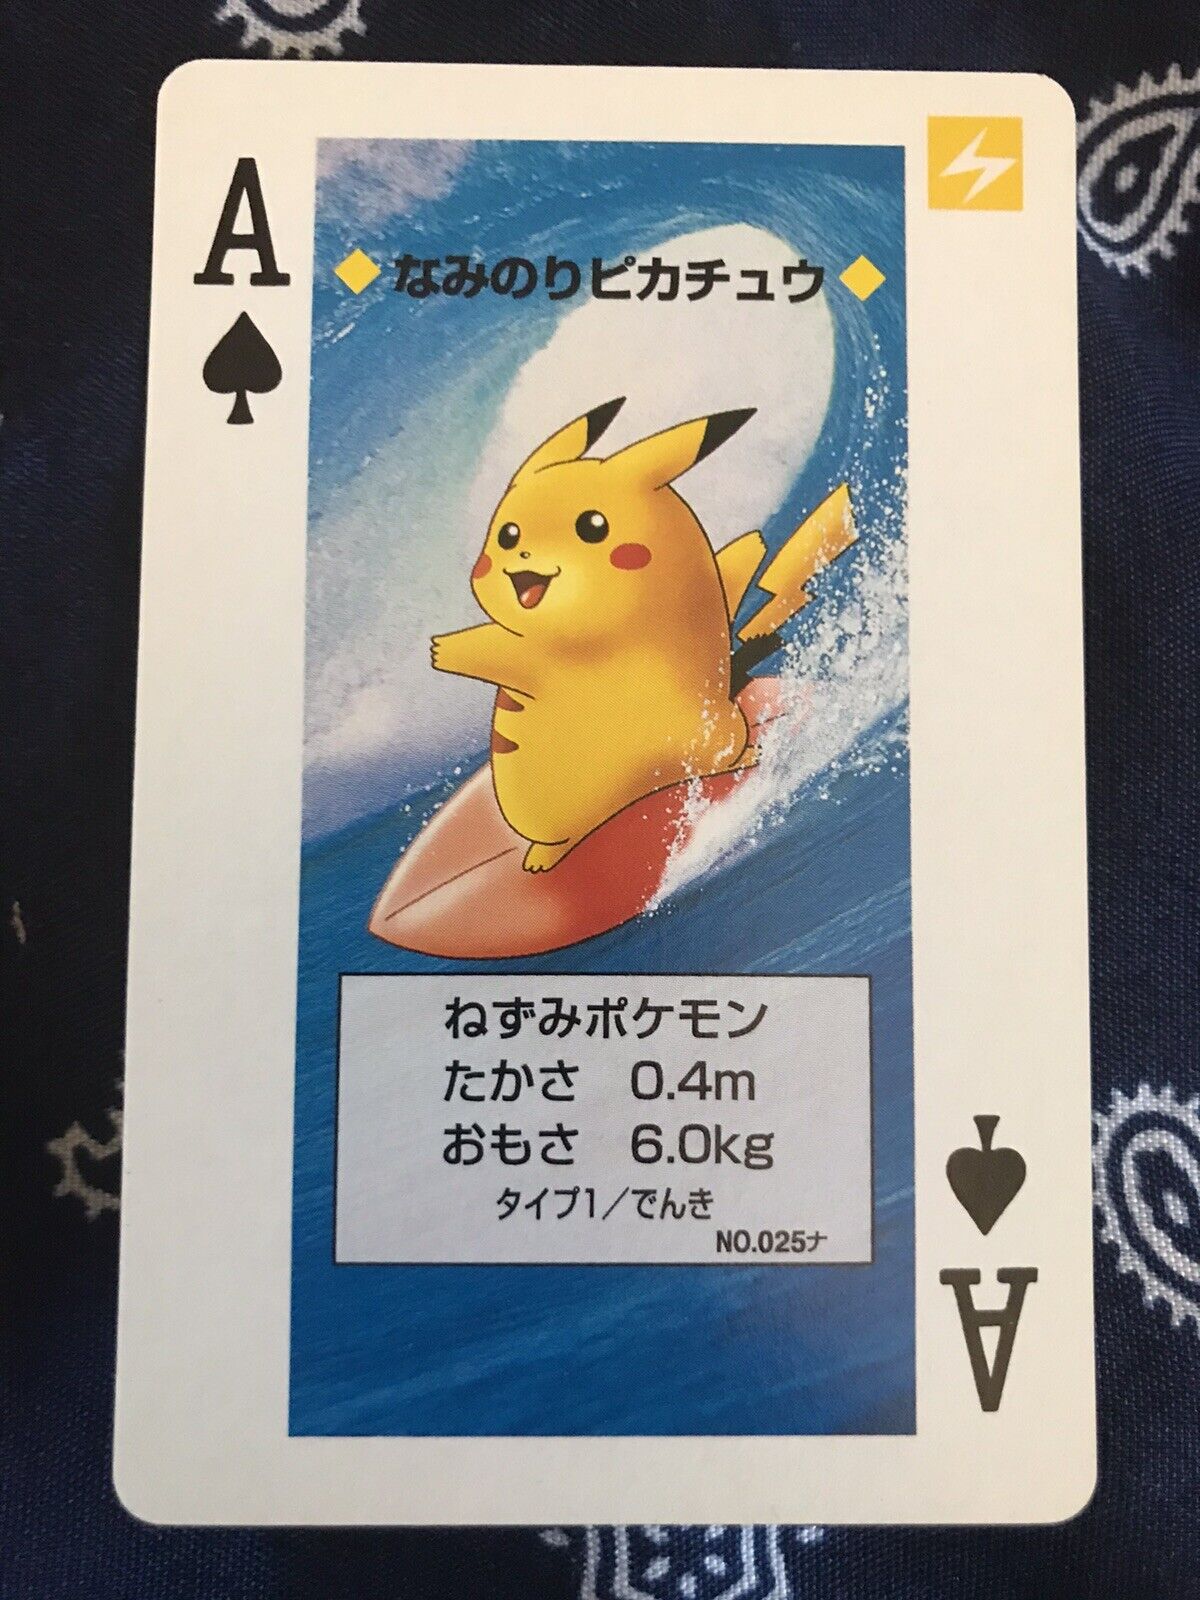 Pokemon Playing Cards (SUPER RARE SURFING PIKACHU VARIANT ACE OF SPADES)